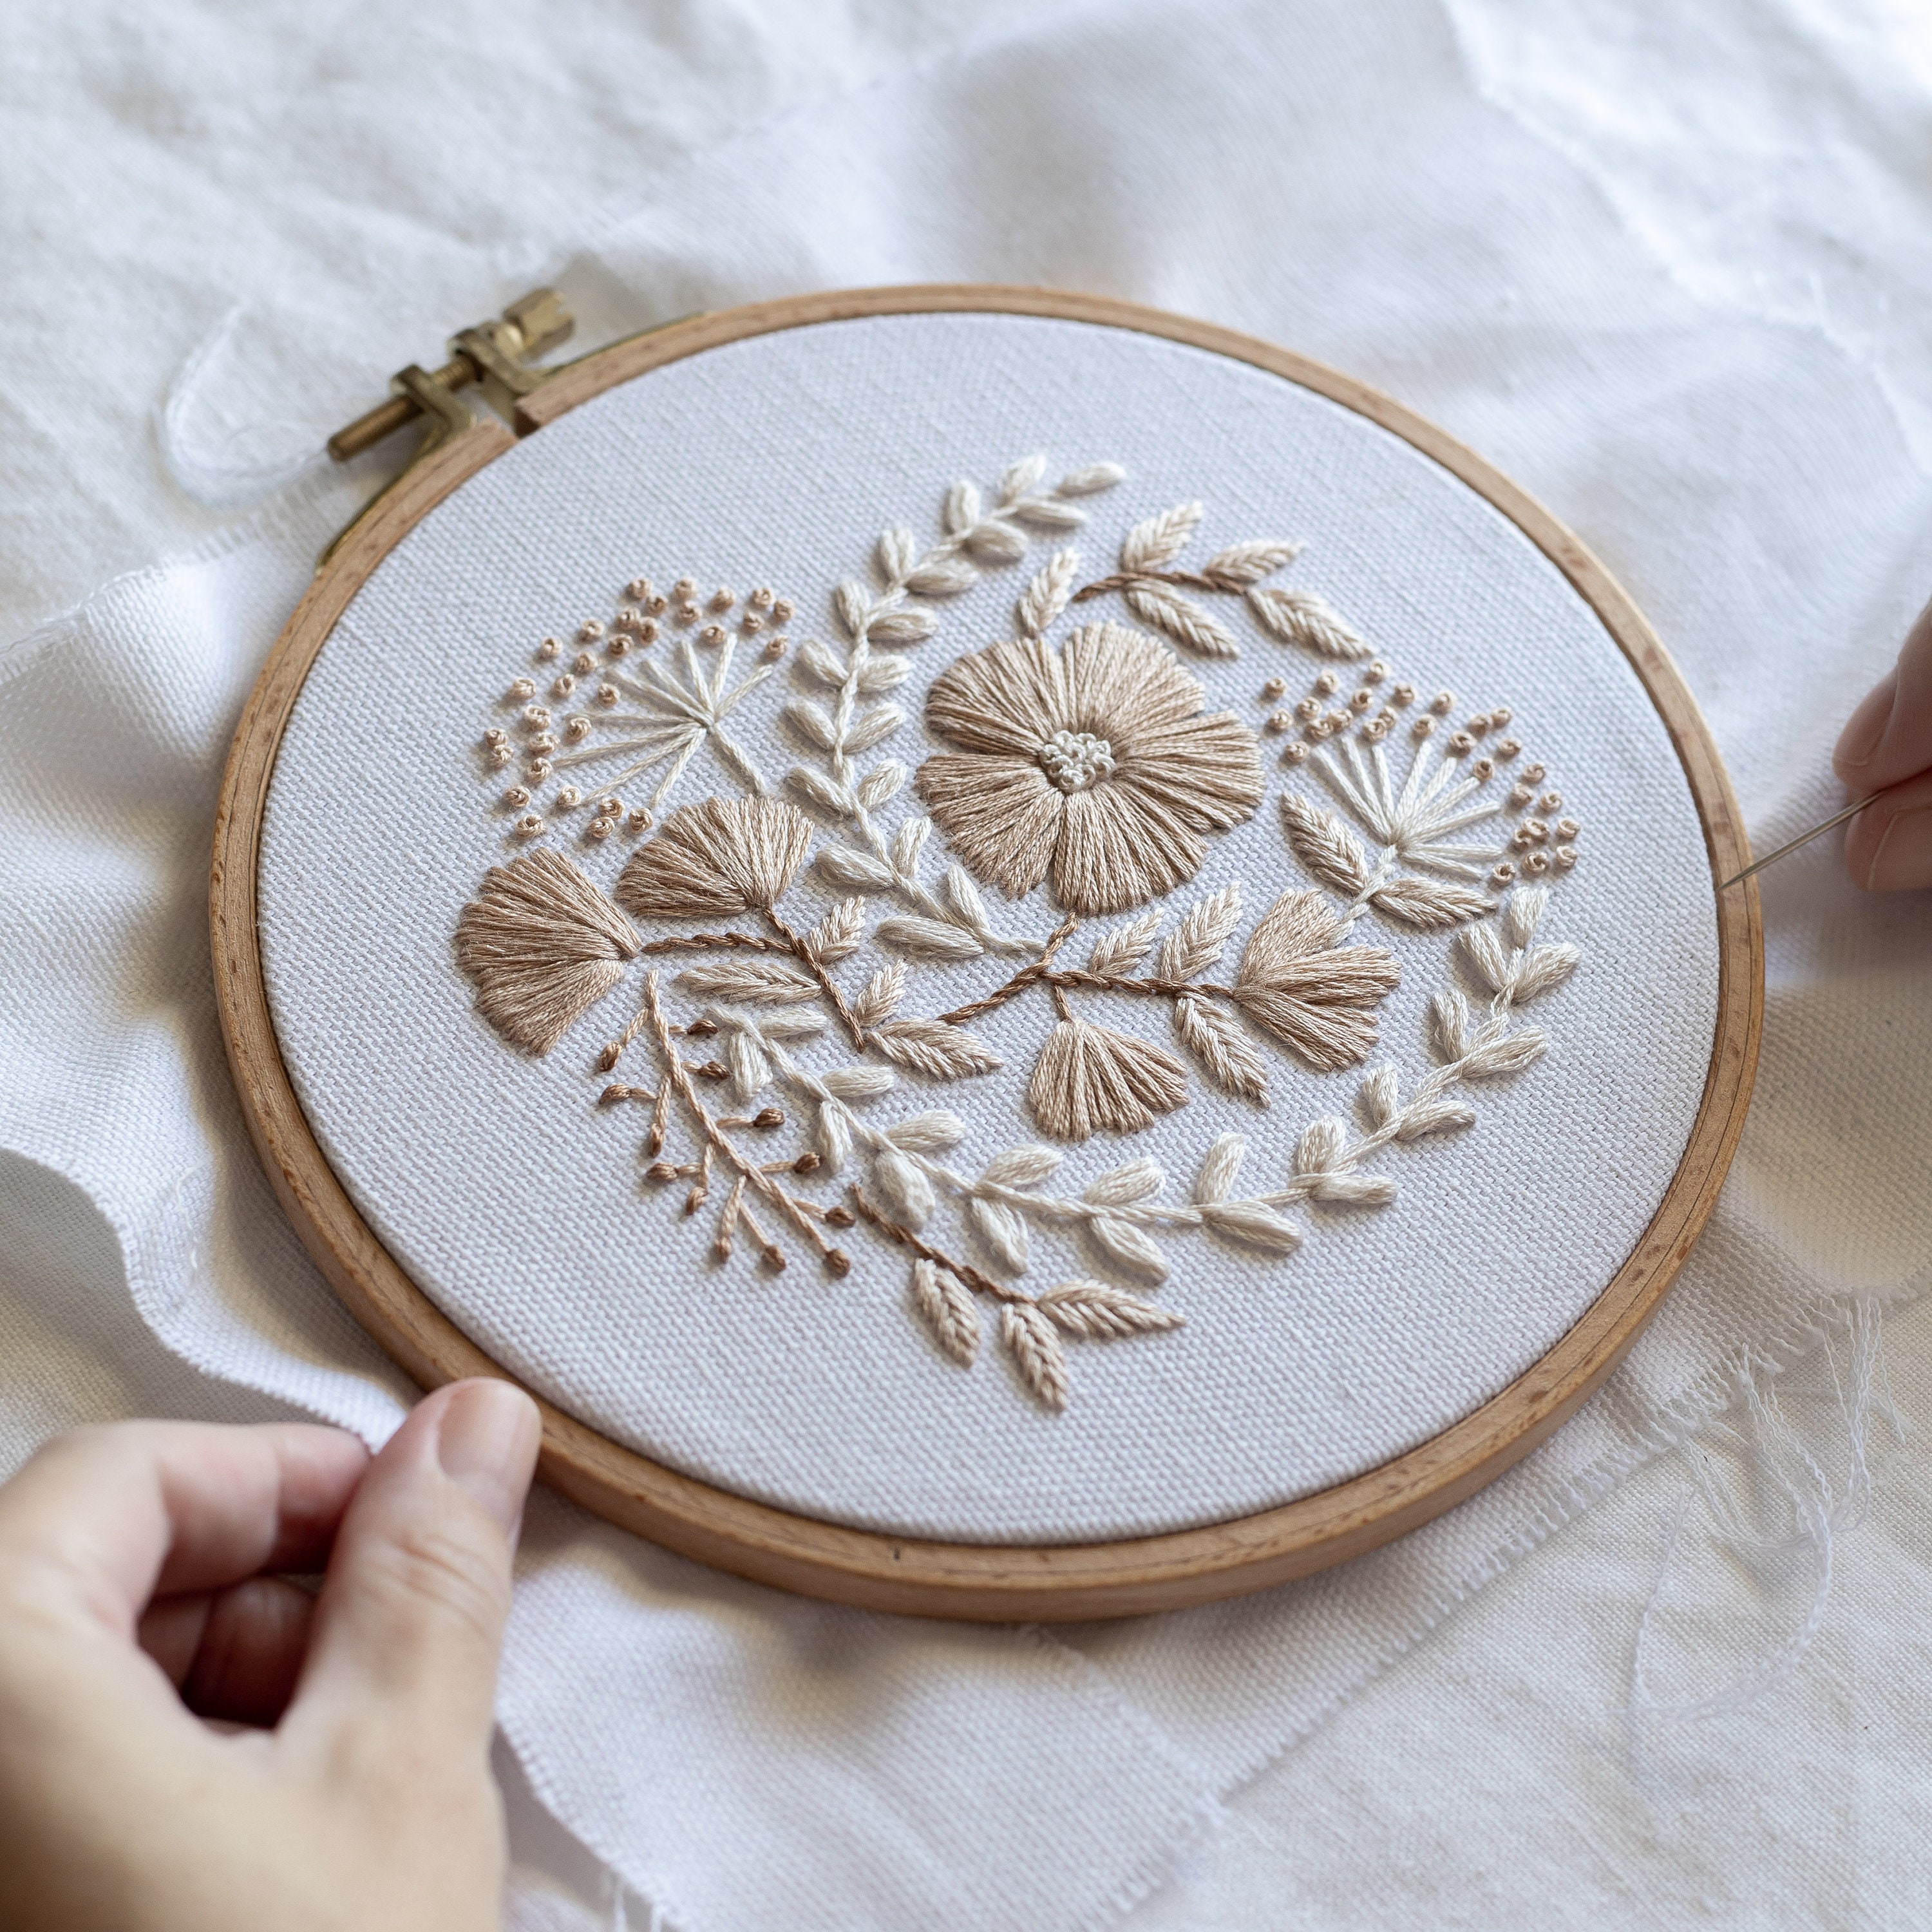 How to do the Woven Circle - Sarah's Hand Embroidery Tutorials